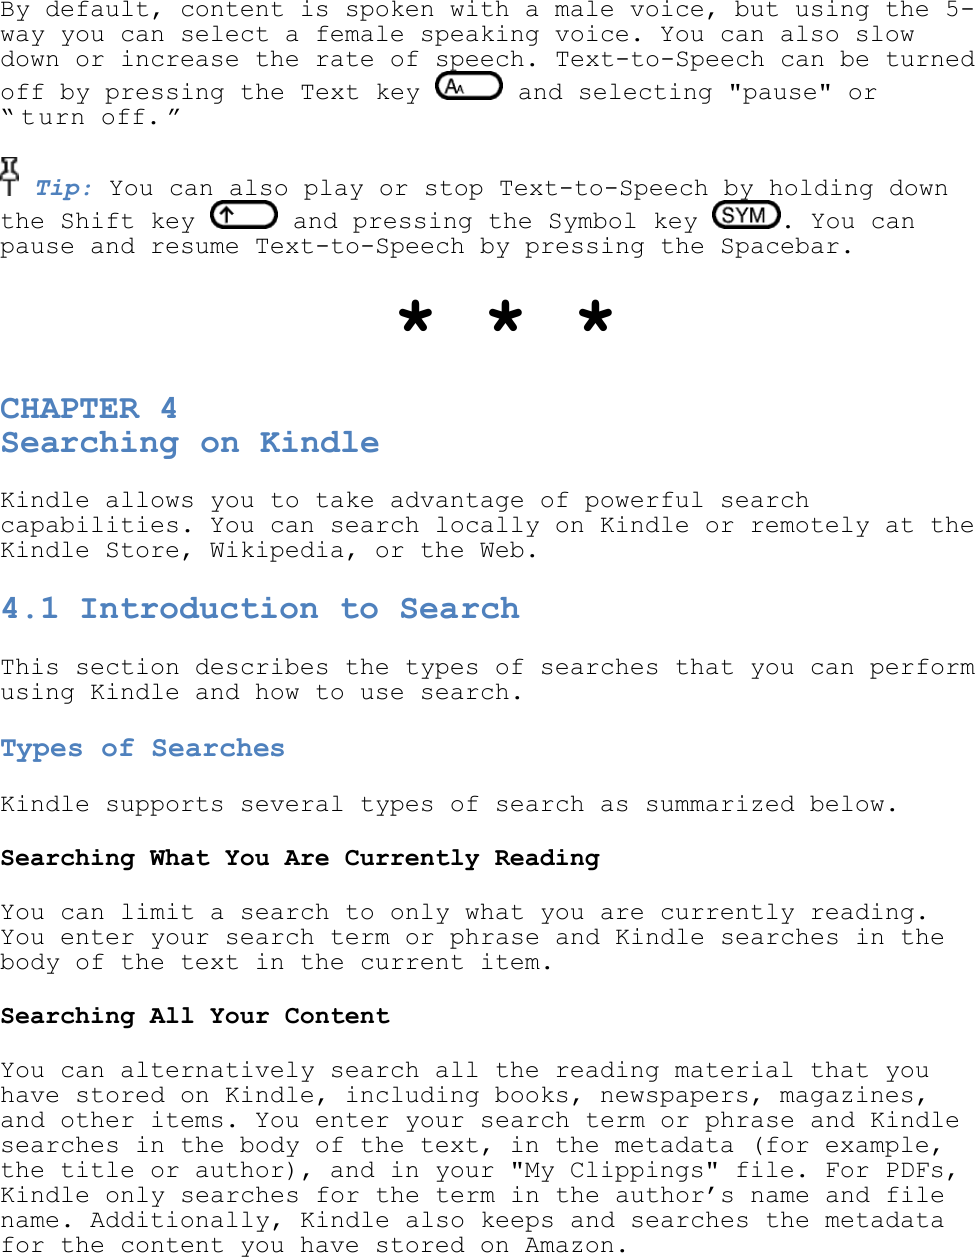   By default, content is spoken with a male voice, but using the 5-way you can select a female speaking voice. You can also slow down or increase the rate of speech. Text-to-Speech can be turned off by pressing the Text key   and selecting &quot;pause&quot; or ― t urn off. ‖     Tip: You can also play or stop Text-to-Speech by holding down the Shift key   and pressing the Symbol key  . You can pause and resume Text-to-Speech by pressing the Spacebar.  * * * CHAPTER 4 Searching on Kindle Kindle allows you to take advantage of powerful search capabilities. You can search locally on Kindle or remotely at the Kindle Store, Wikipedia, or the Web. 4.1 Introduction to Search This section describes the types of searches that you can perform using Kindle and how to use search. Types of Searches Kindle supports several types of search as summarized below. Searching What You Are Currently Reading You can limit a search to only what you are currently reading. You enter your search term or phrase and Kindle searches in the body of the text in the current item. Searching All Your Content You can alternatively search all the reading material that you have stored on Kindle, including books, newspapers, magazines, and other items. You enter your search term or phrase and Kindle searches in the body of the text, in the metadata (for example, the title or author), and in your &quot;My Clippings&quot; file. For PDFs, Kindle only searches for the term in the author’s name and file name. Additionally, Kindle also keeps and searches the metadata for the content you have stored on Amazon. 